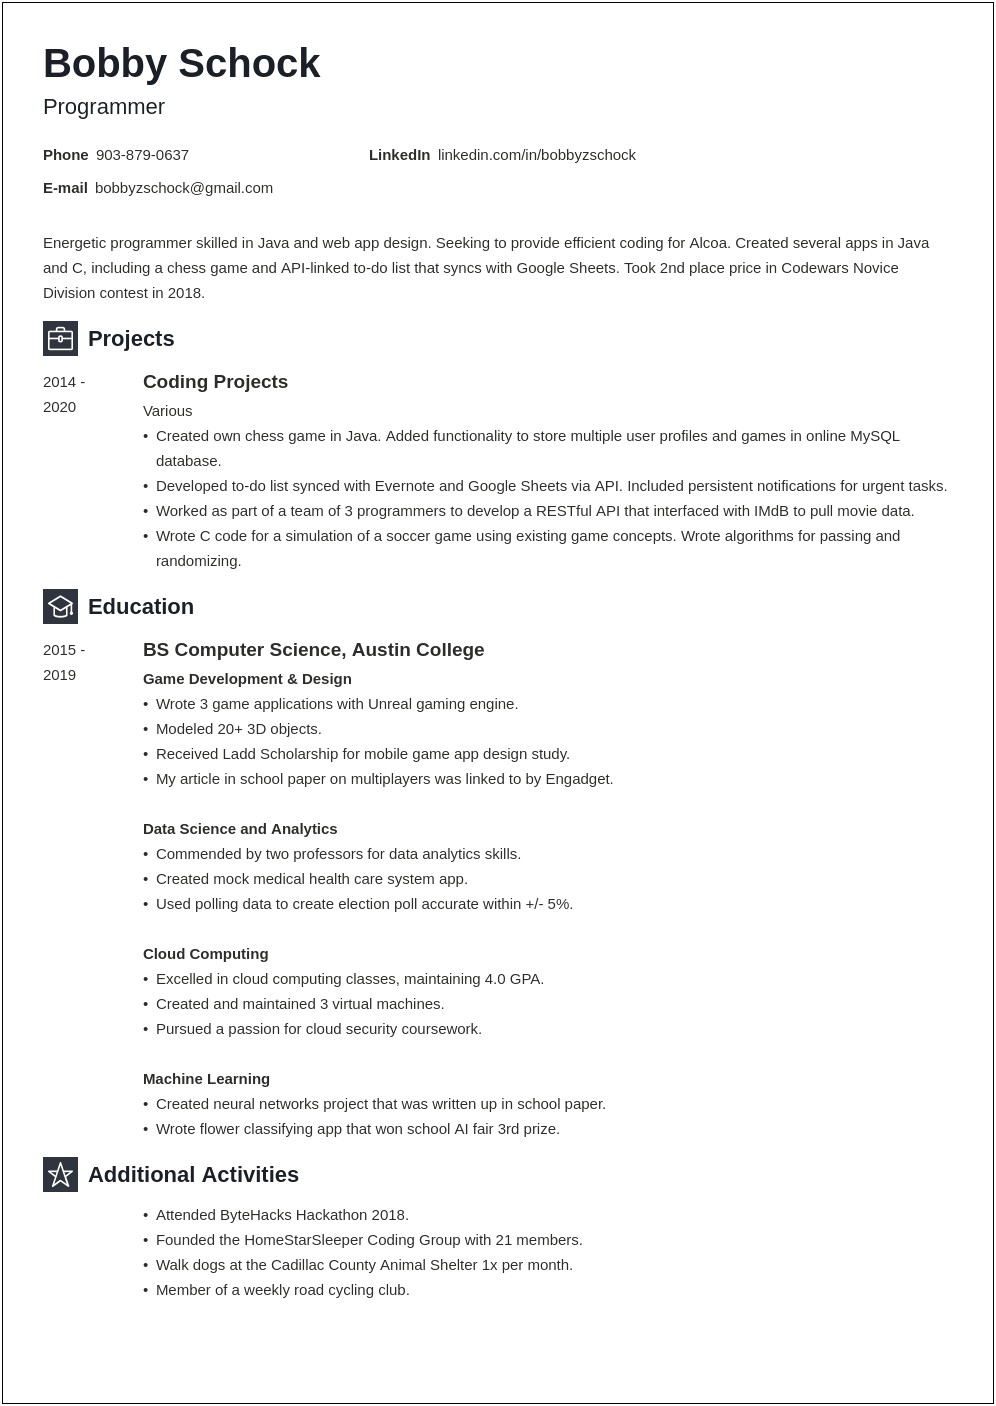 Best Resume Format For No Experience